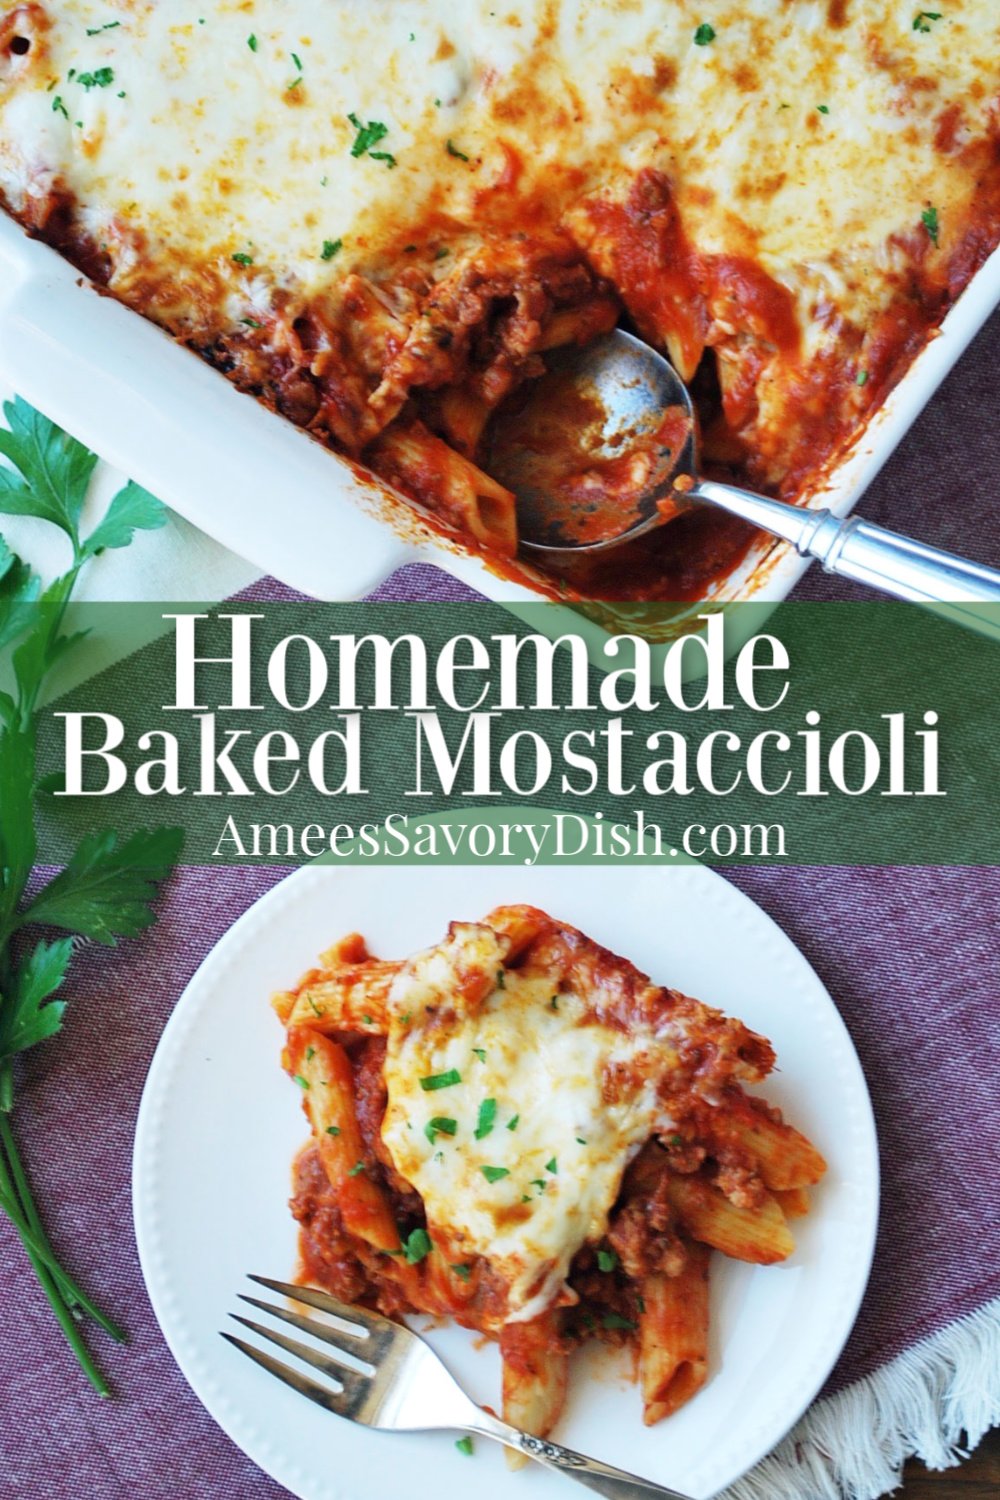 Baked mostaccioli is easy comfort food at its best! This Italian pasta casserole is filled with lean grass-fed beef, Italian sausage, fresh vegetables, and lots of cheese! #bakedmostaccioli #bakedpasta #pastacasserole #beefcasserole #pasta #Italianfood via @Ameessavorydish